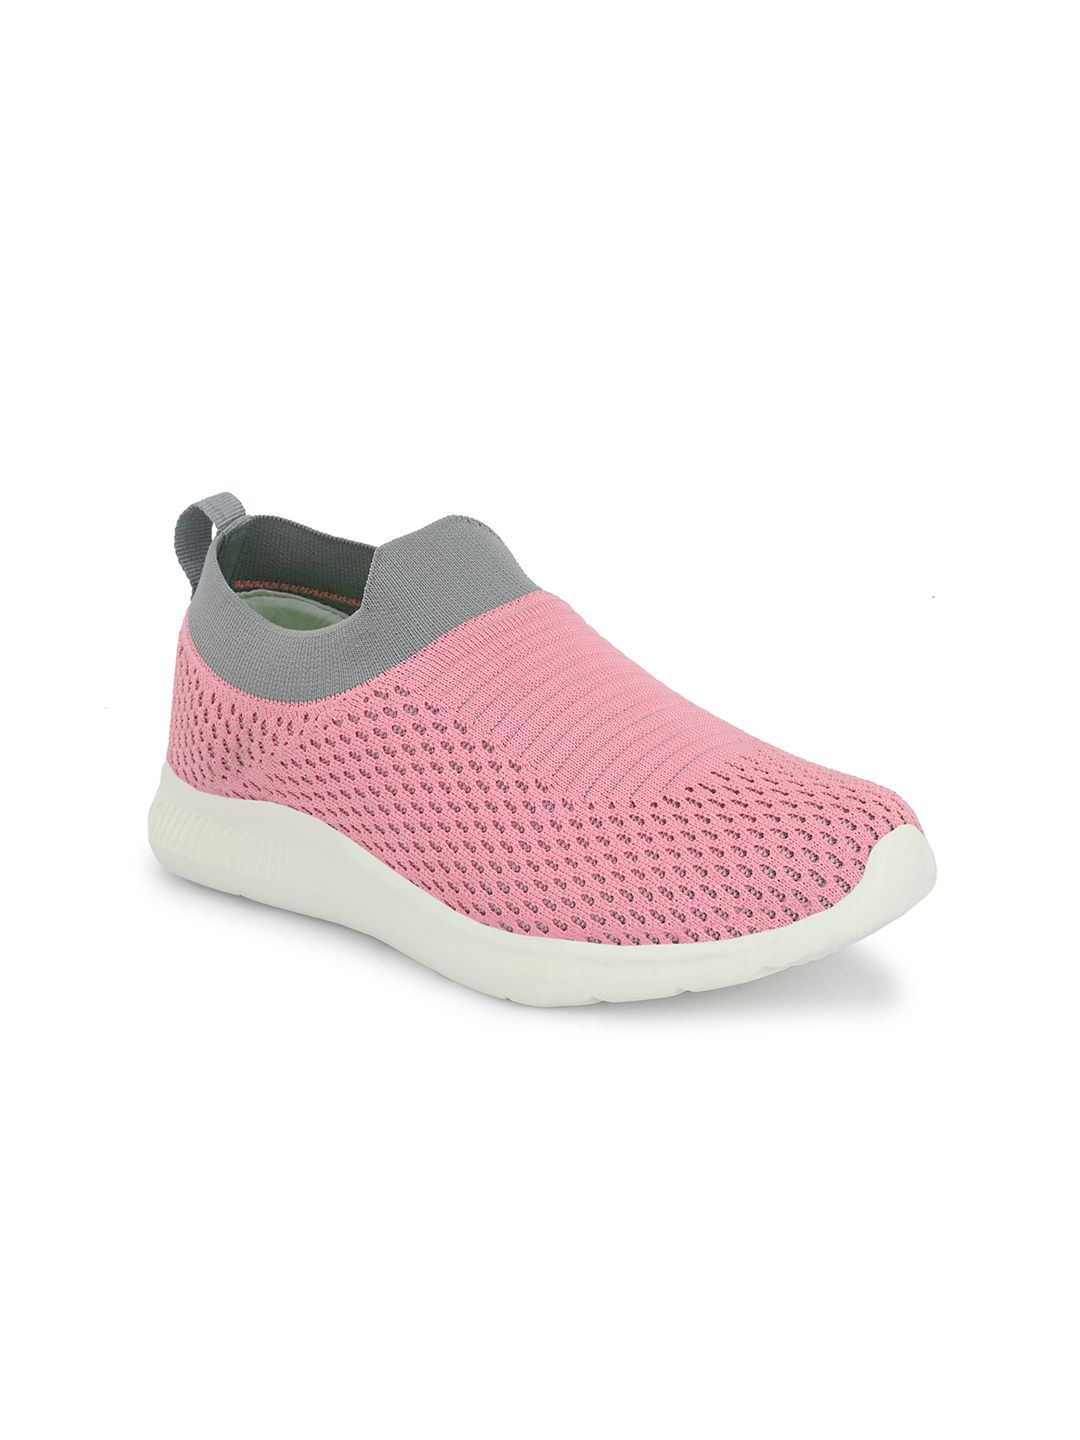 OFF LIMITS Women Pink Mesh Walking Non-Marking Shoes Price in India